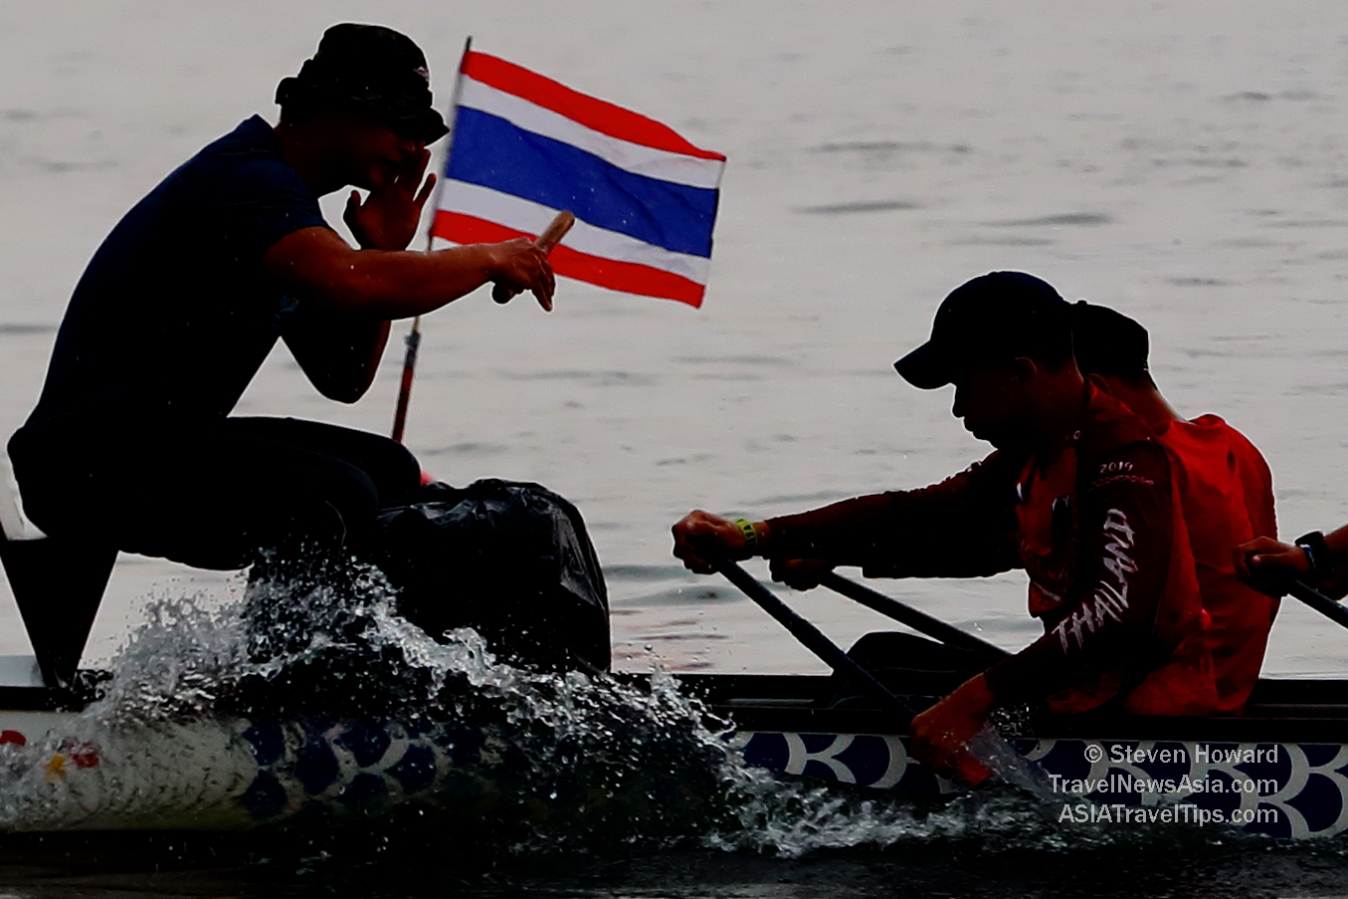 Thai paddlers in action. Picture by Steven Howard of TravelNewsAsia.com Click to enlarge.